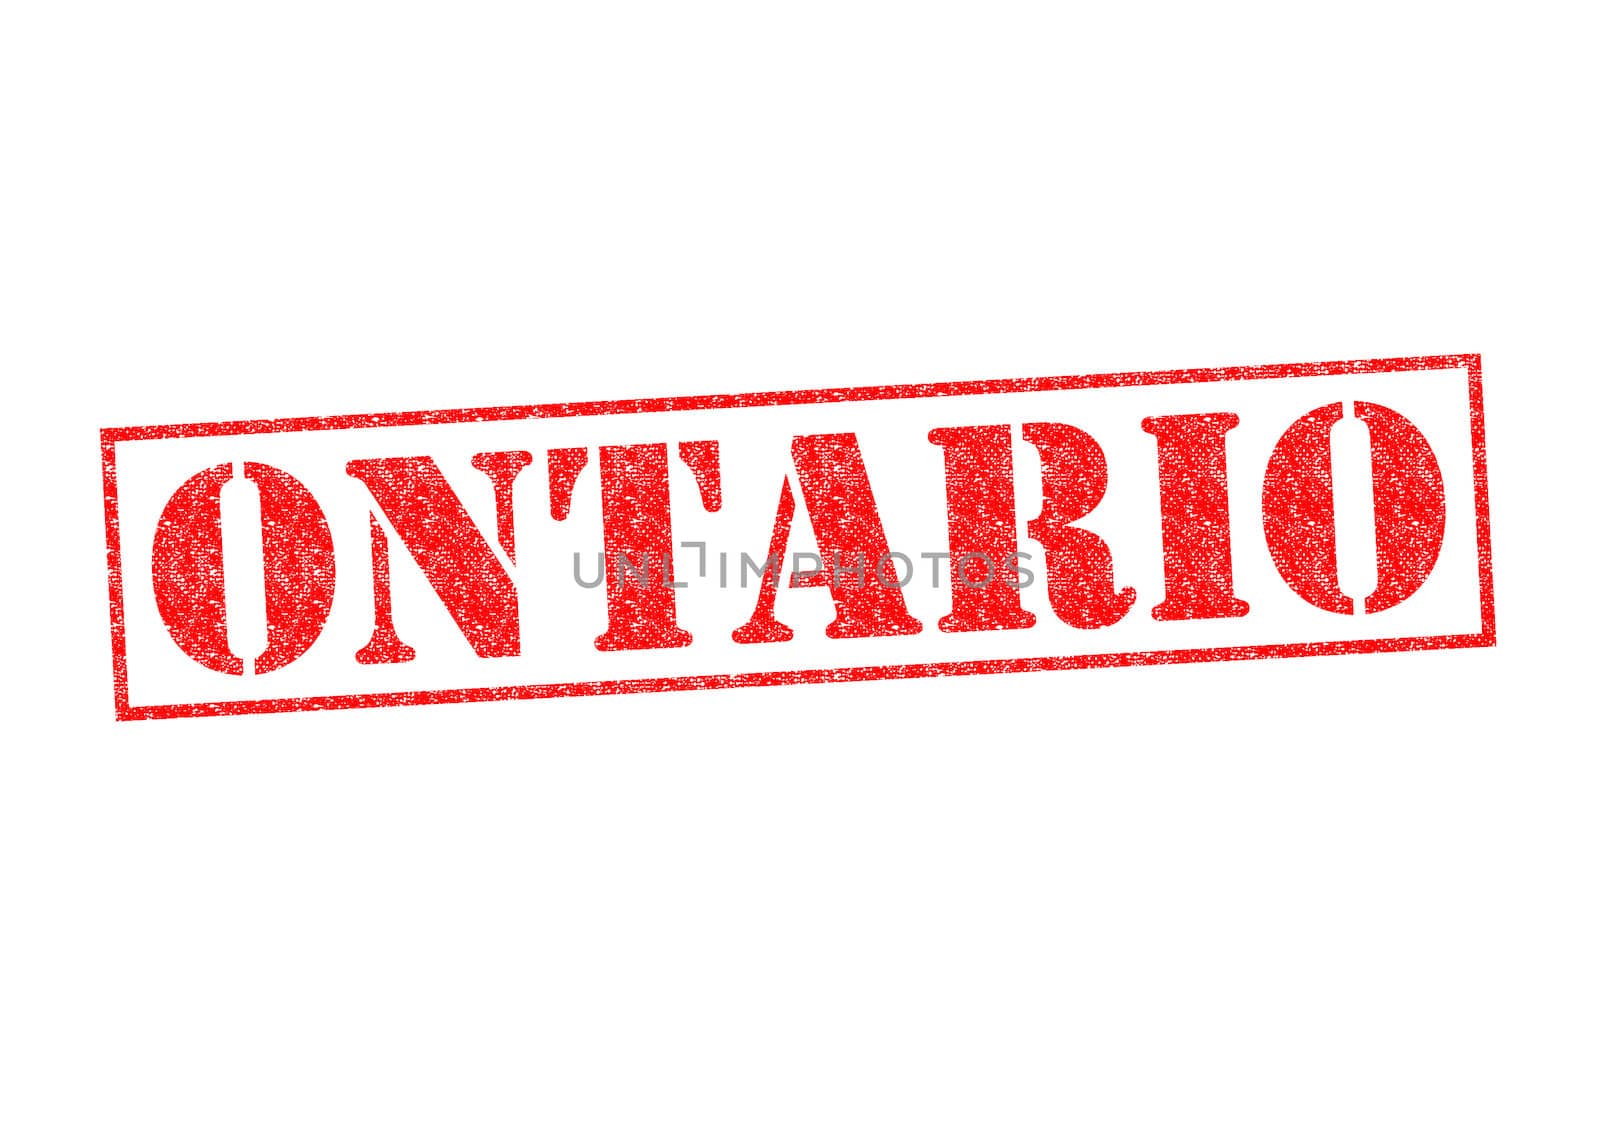 ONTARIO Rubber Stamp over a white background.